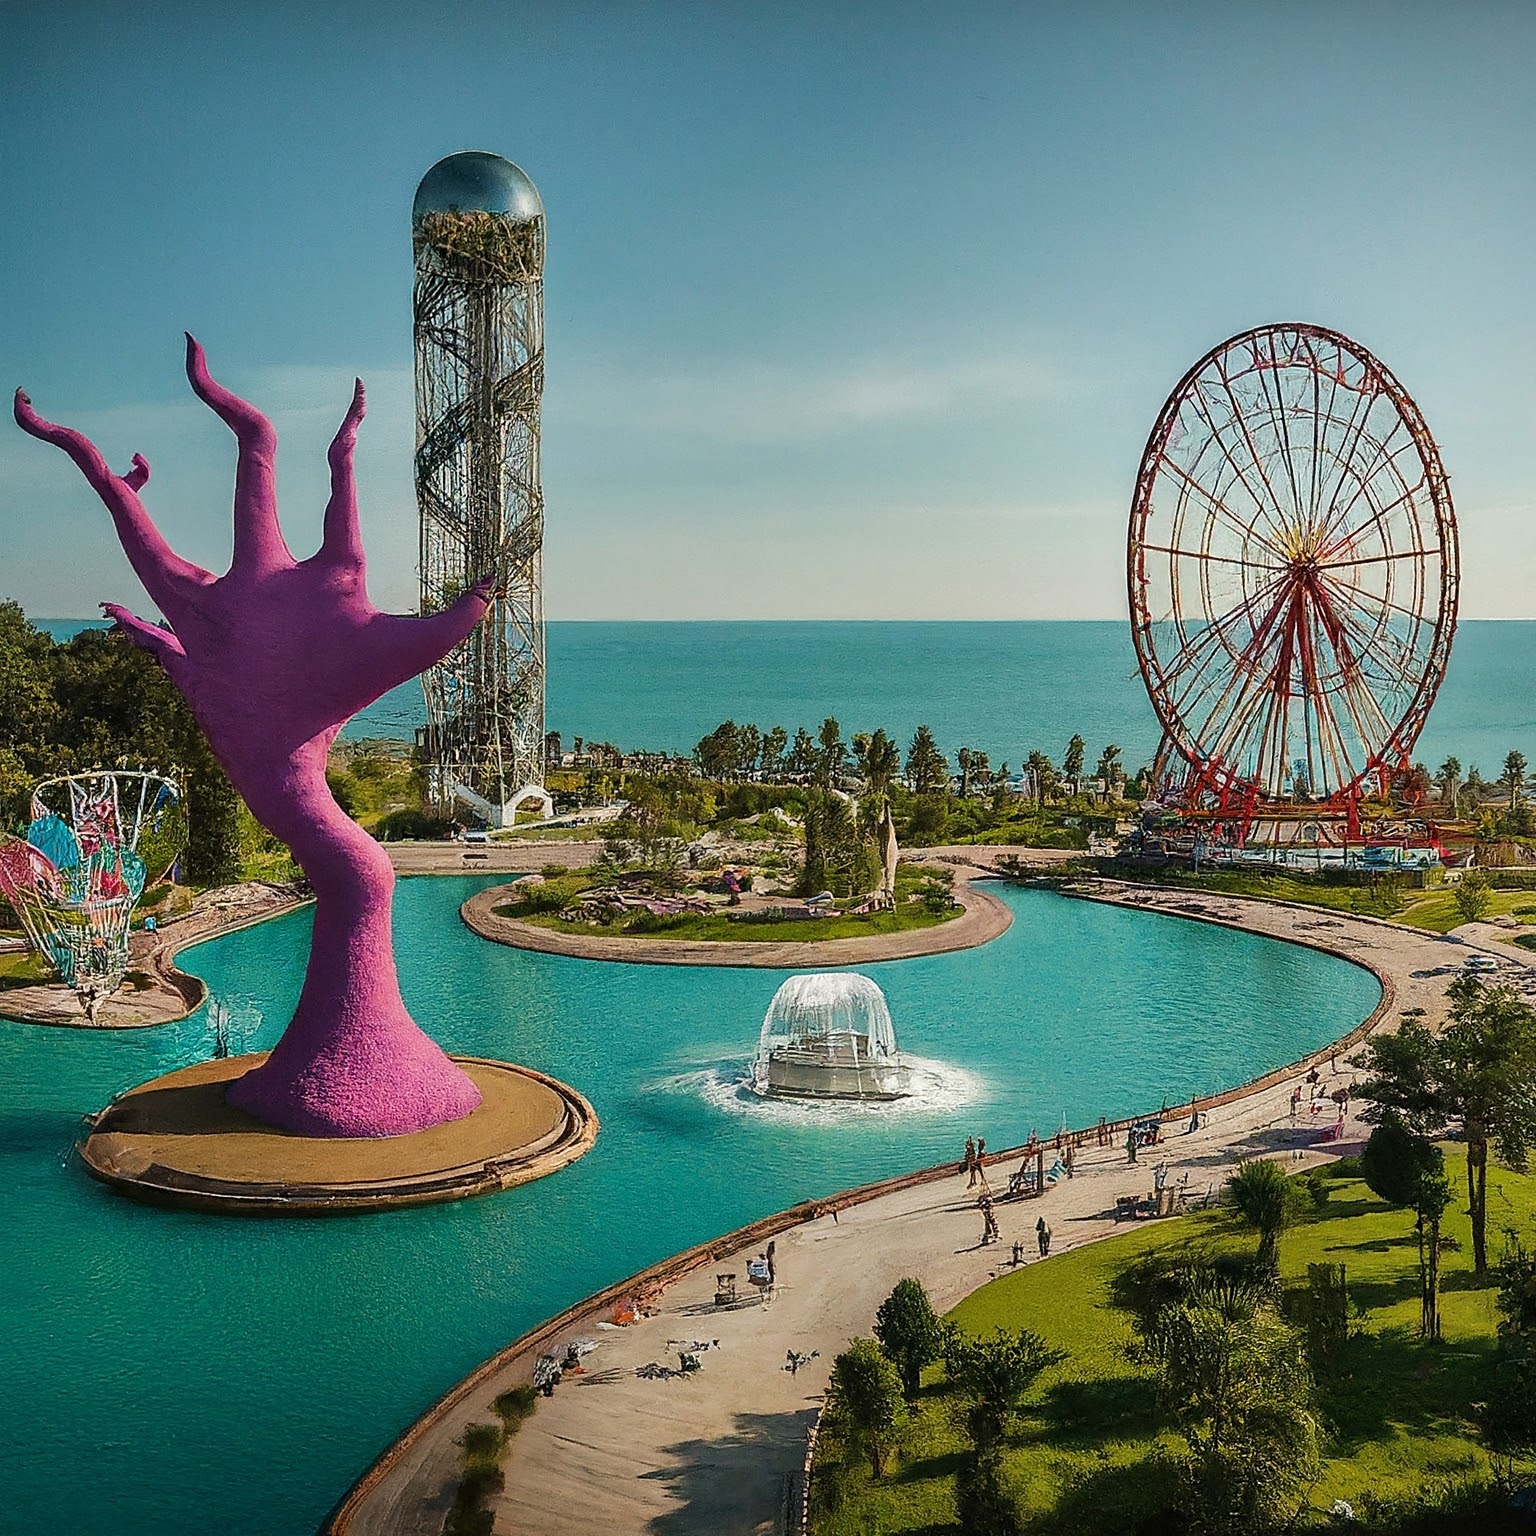 Miracle Park in Batumi, Georgia, with sculptures, waterfalls, and Ferris wheel.